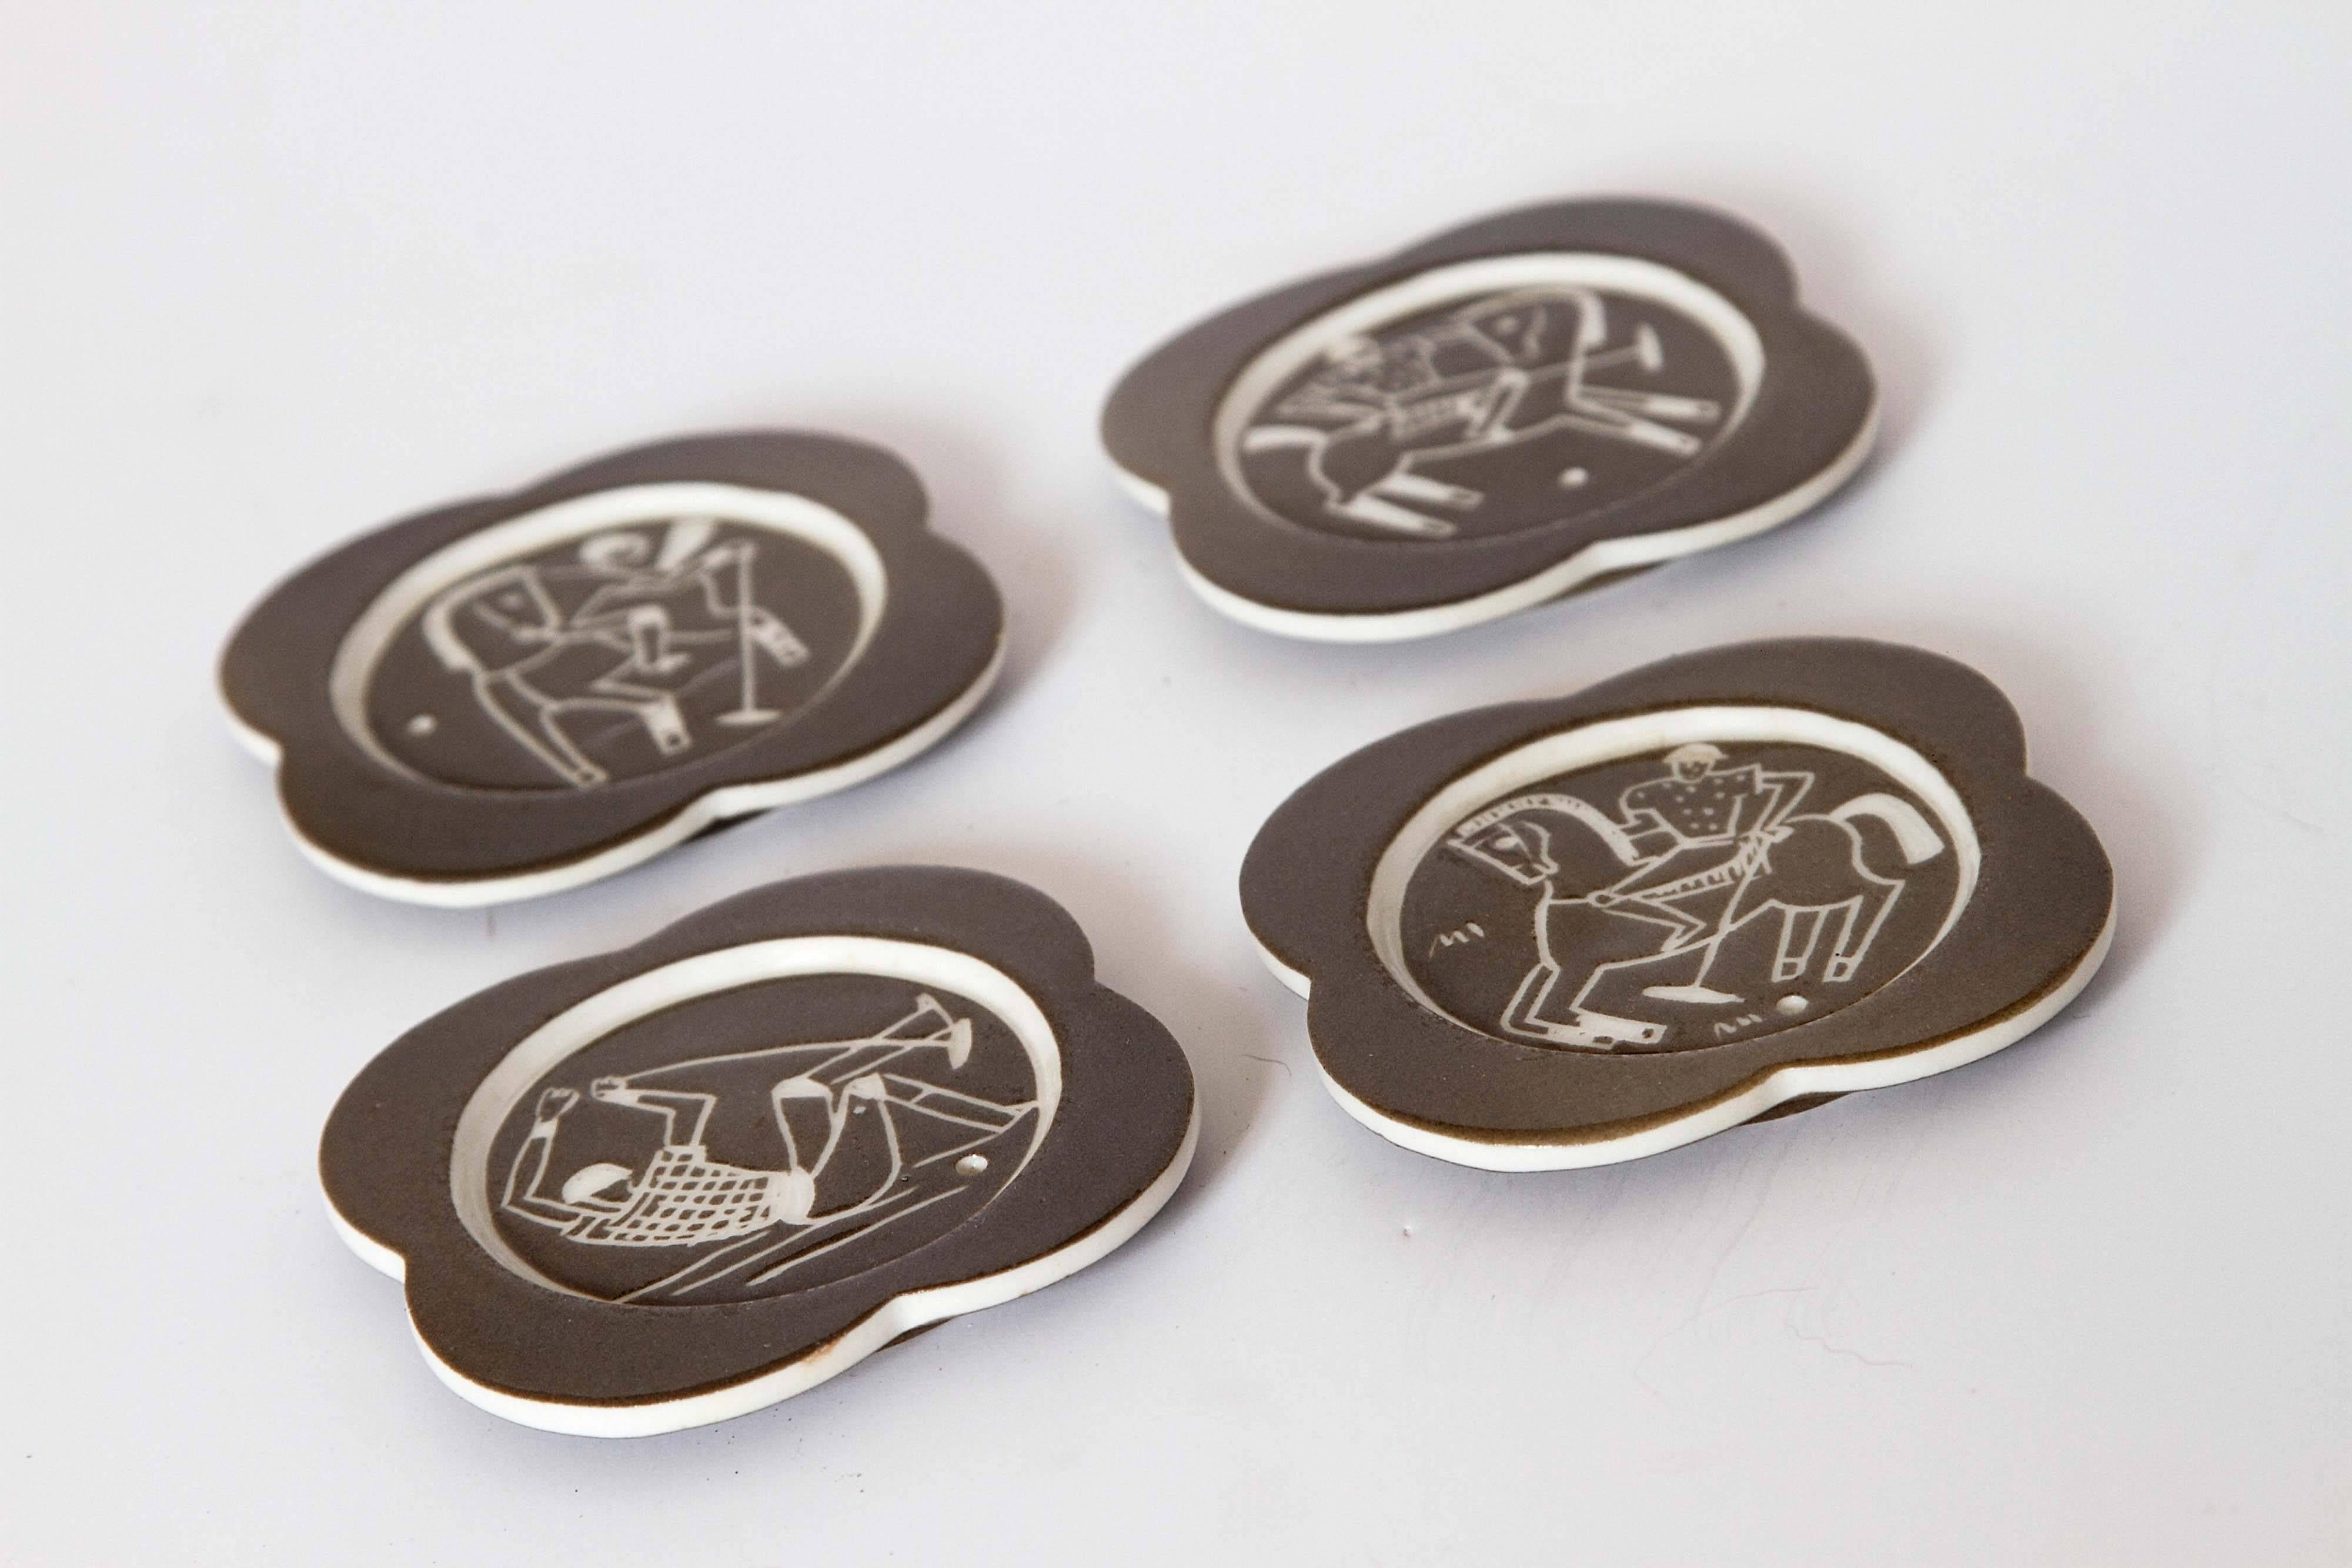 Waylande Gregory Studio Polo Player Art Deco Sgraffito Coasters
Iconic set of four different Polo playing Machine Age images by Gregory.

Likely, circa 1932-1933. One of the Classic early WG Sgraffito designs for his own studio, likely shortly